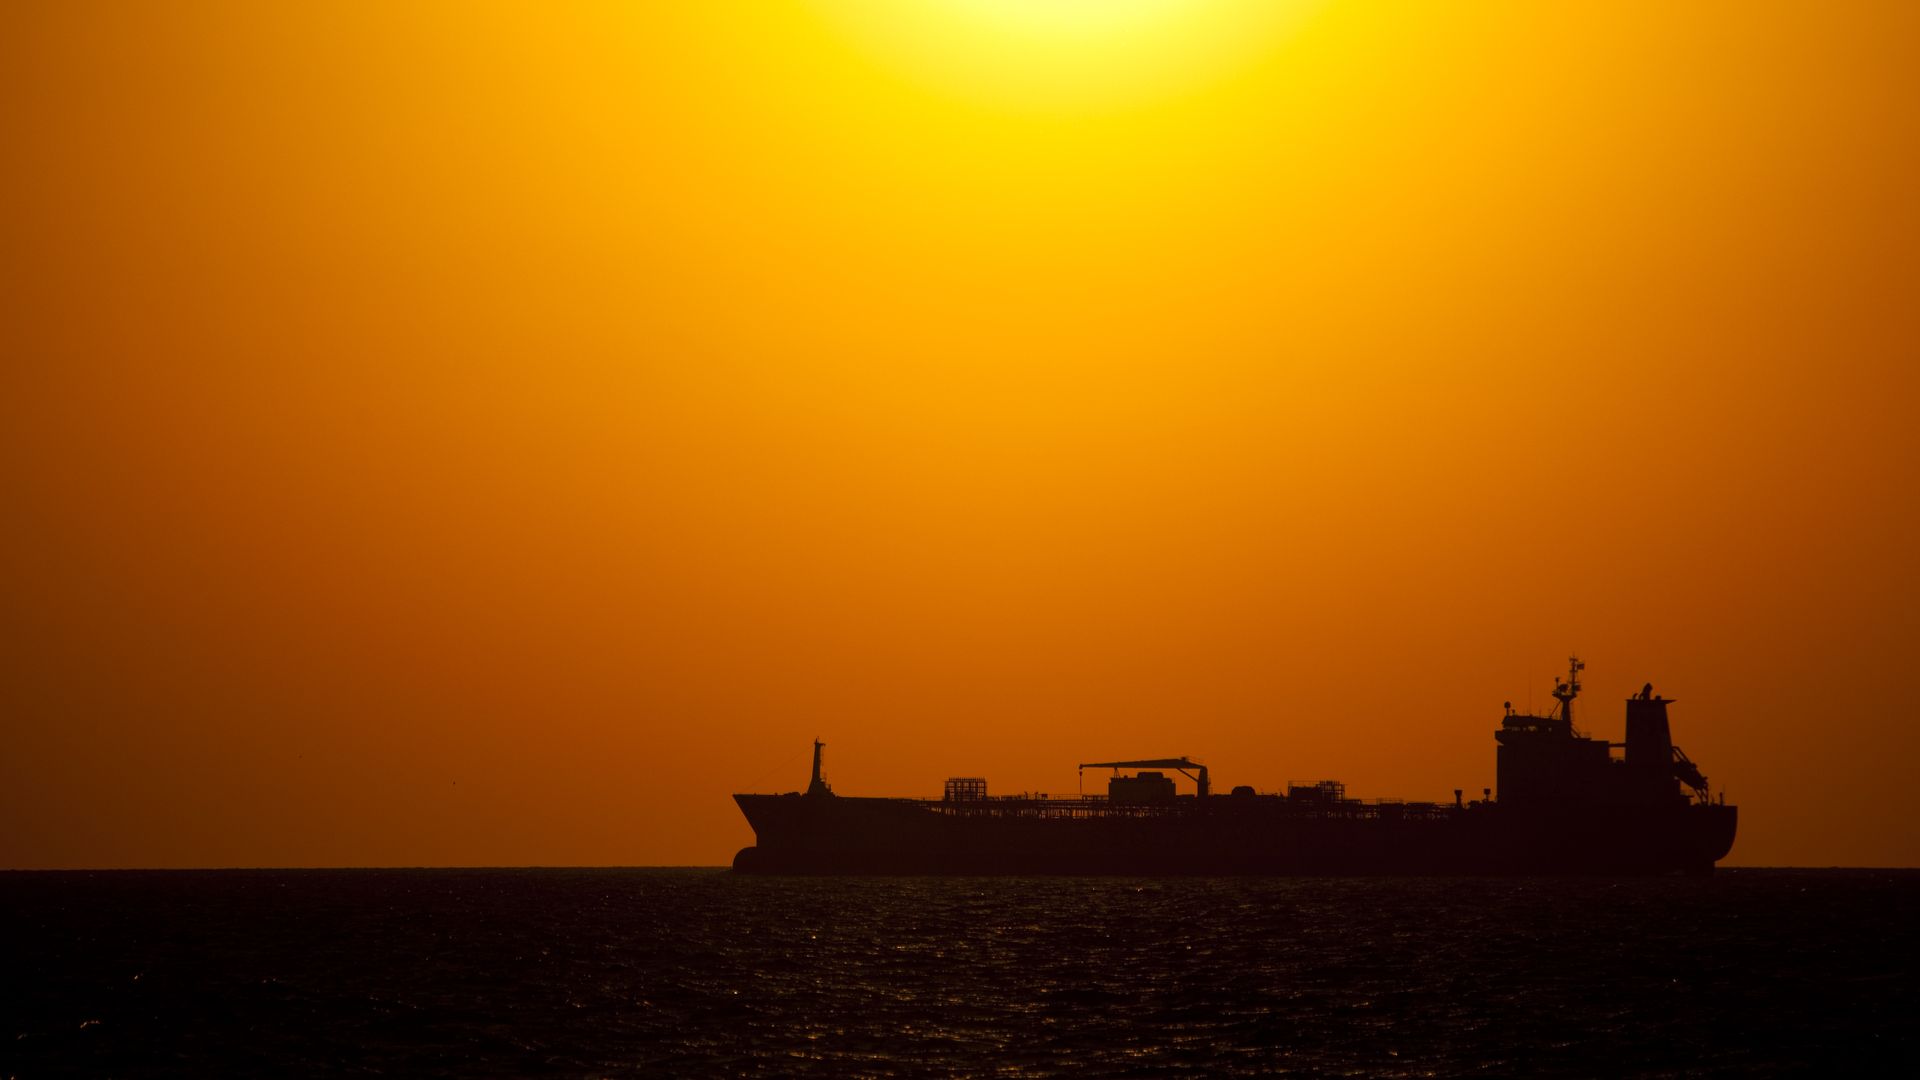 Oil tanker on Gulf of Mexico